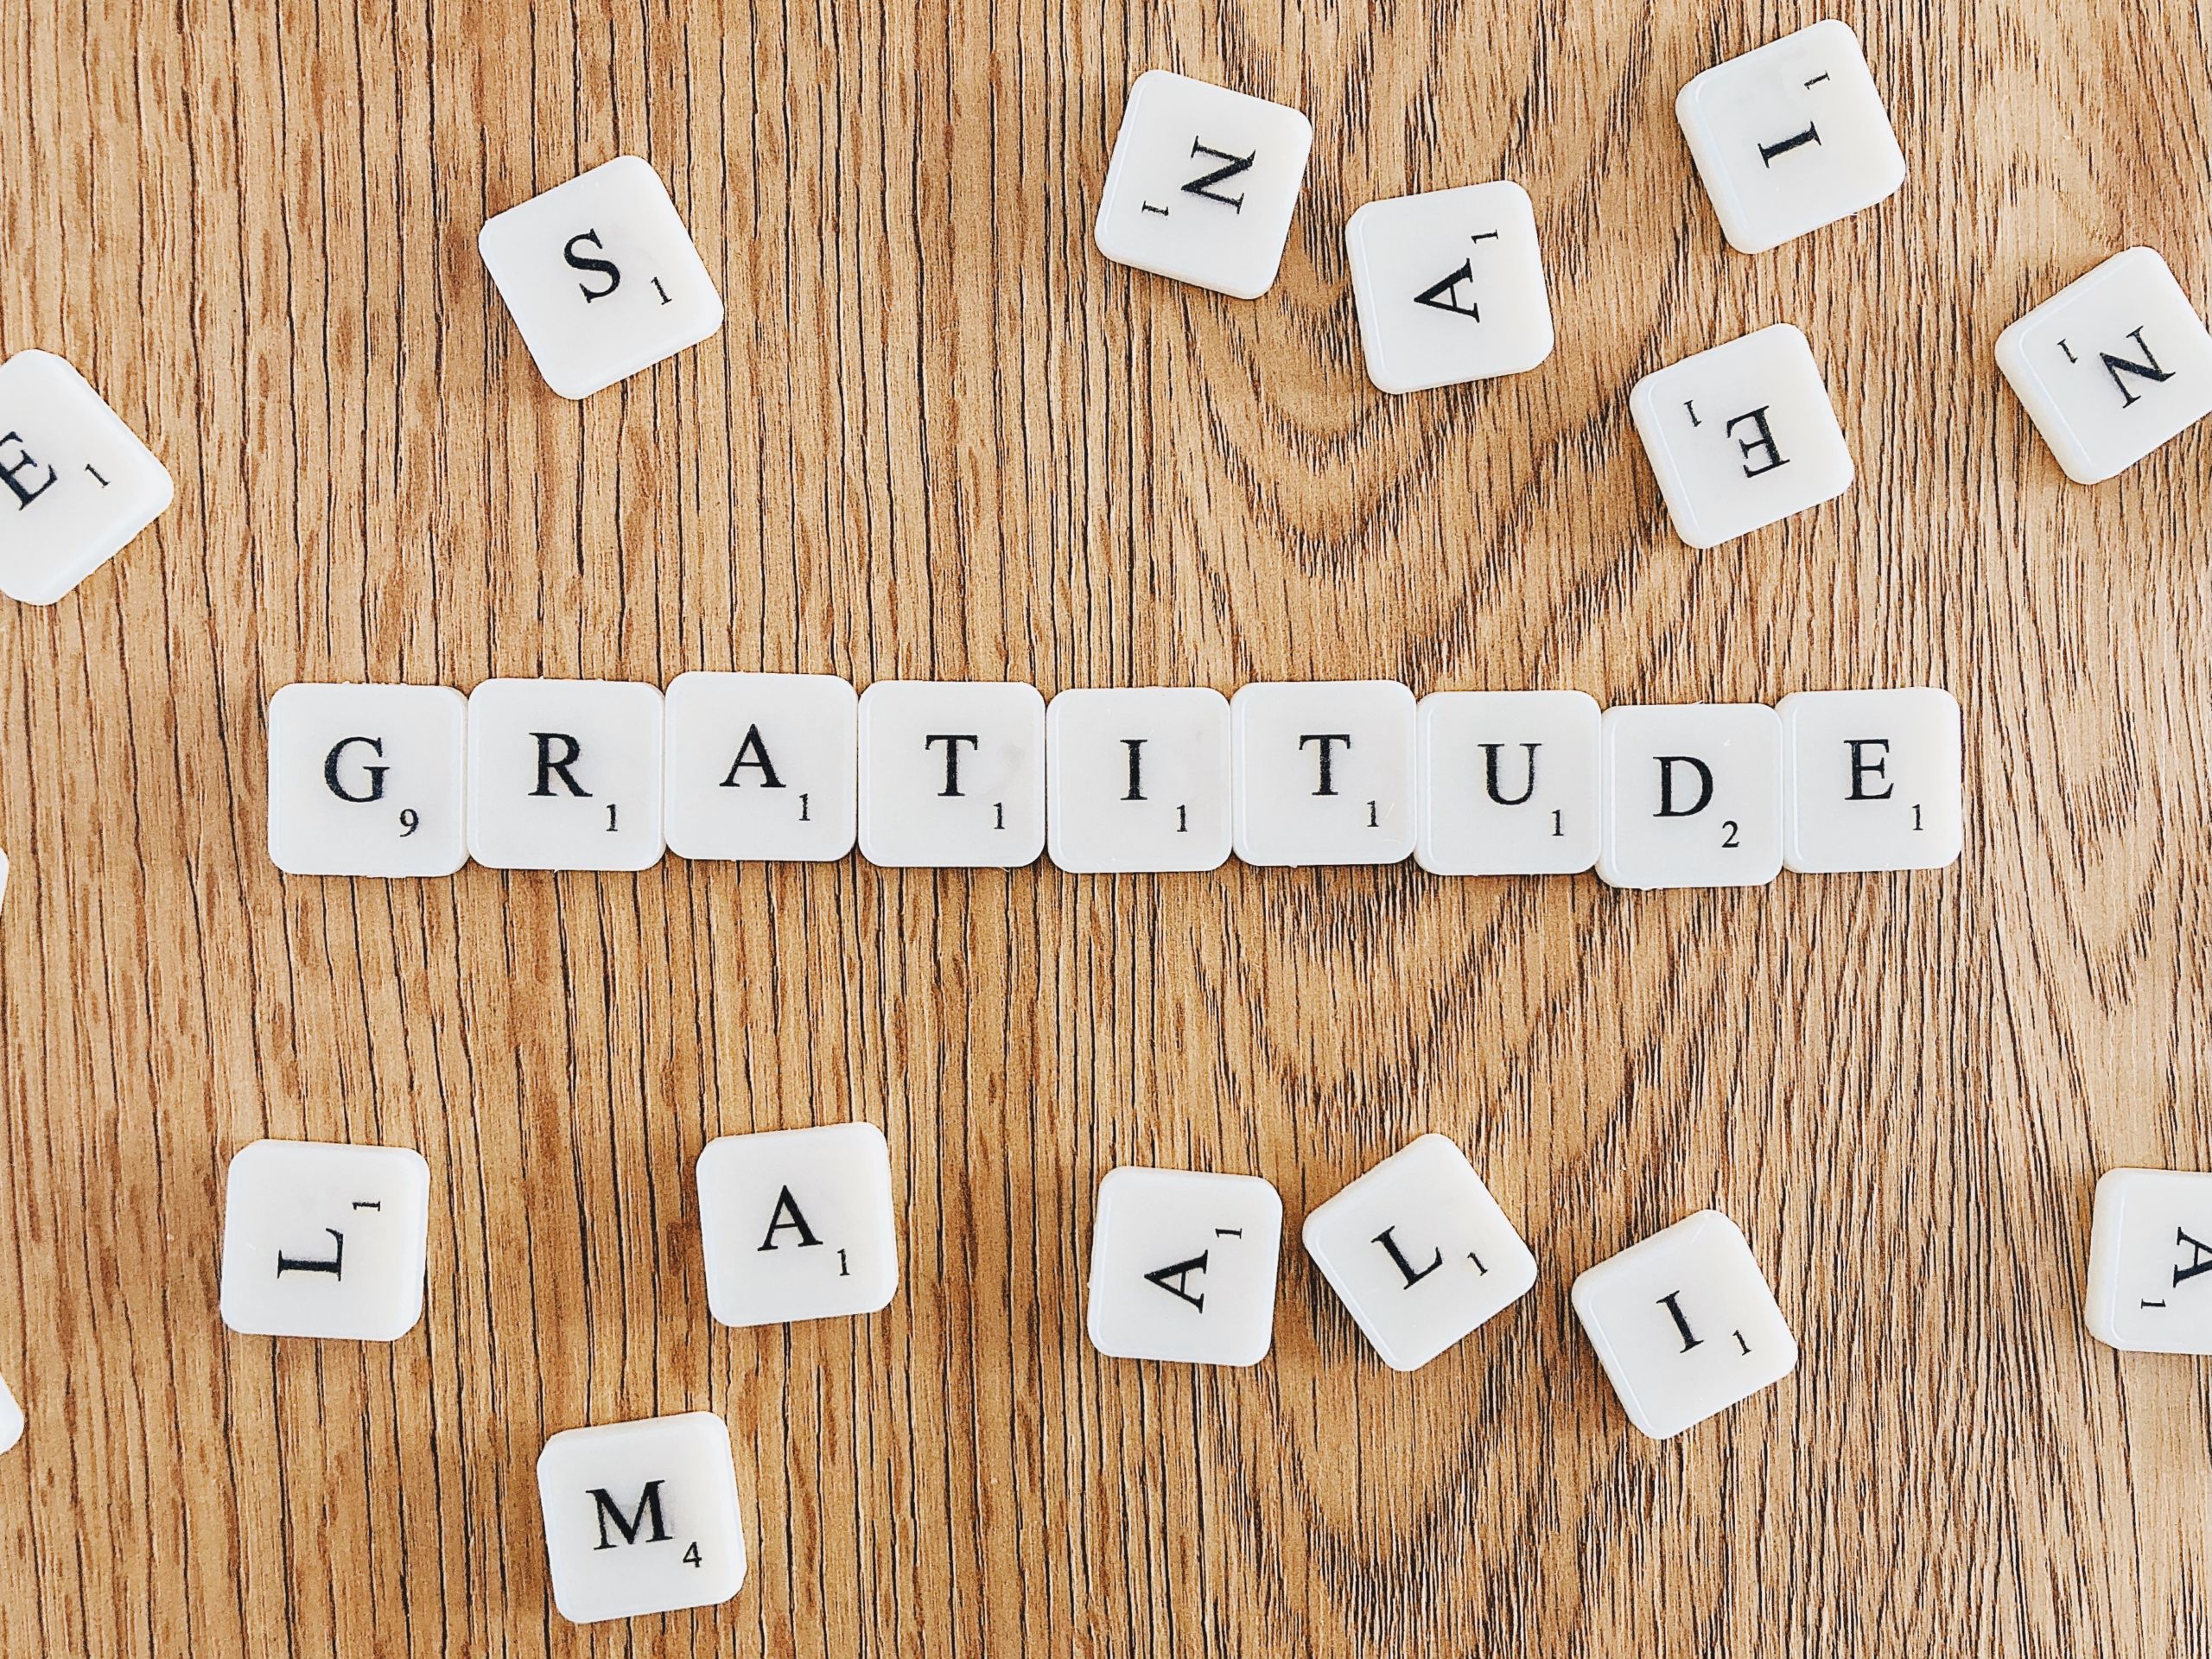 An attitude of gratitude 20 things to be thankful for this year